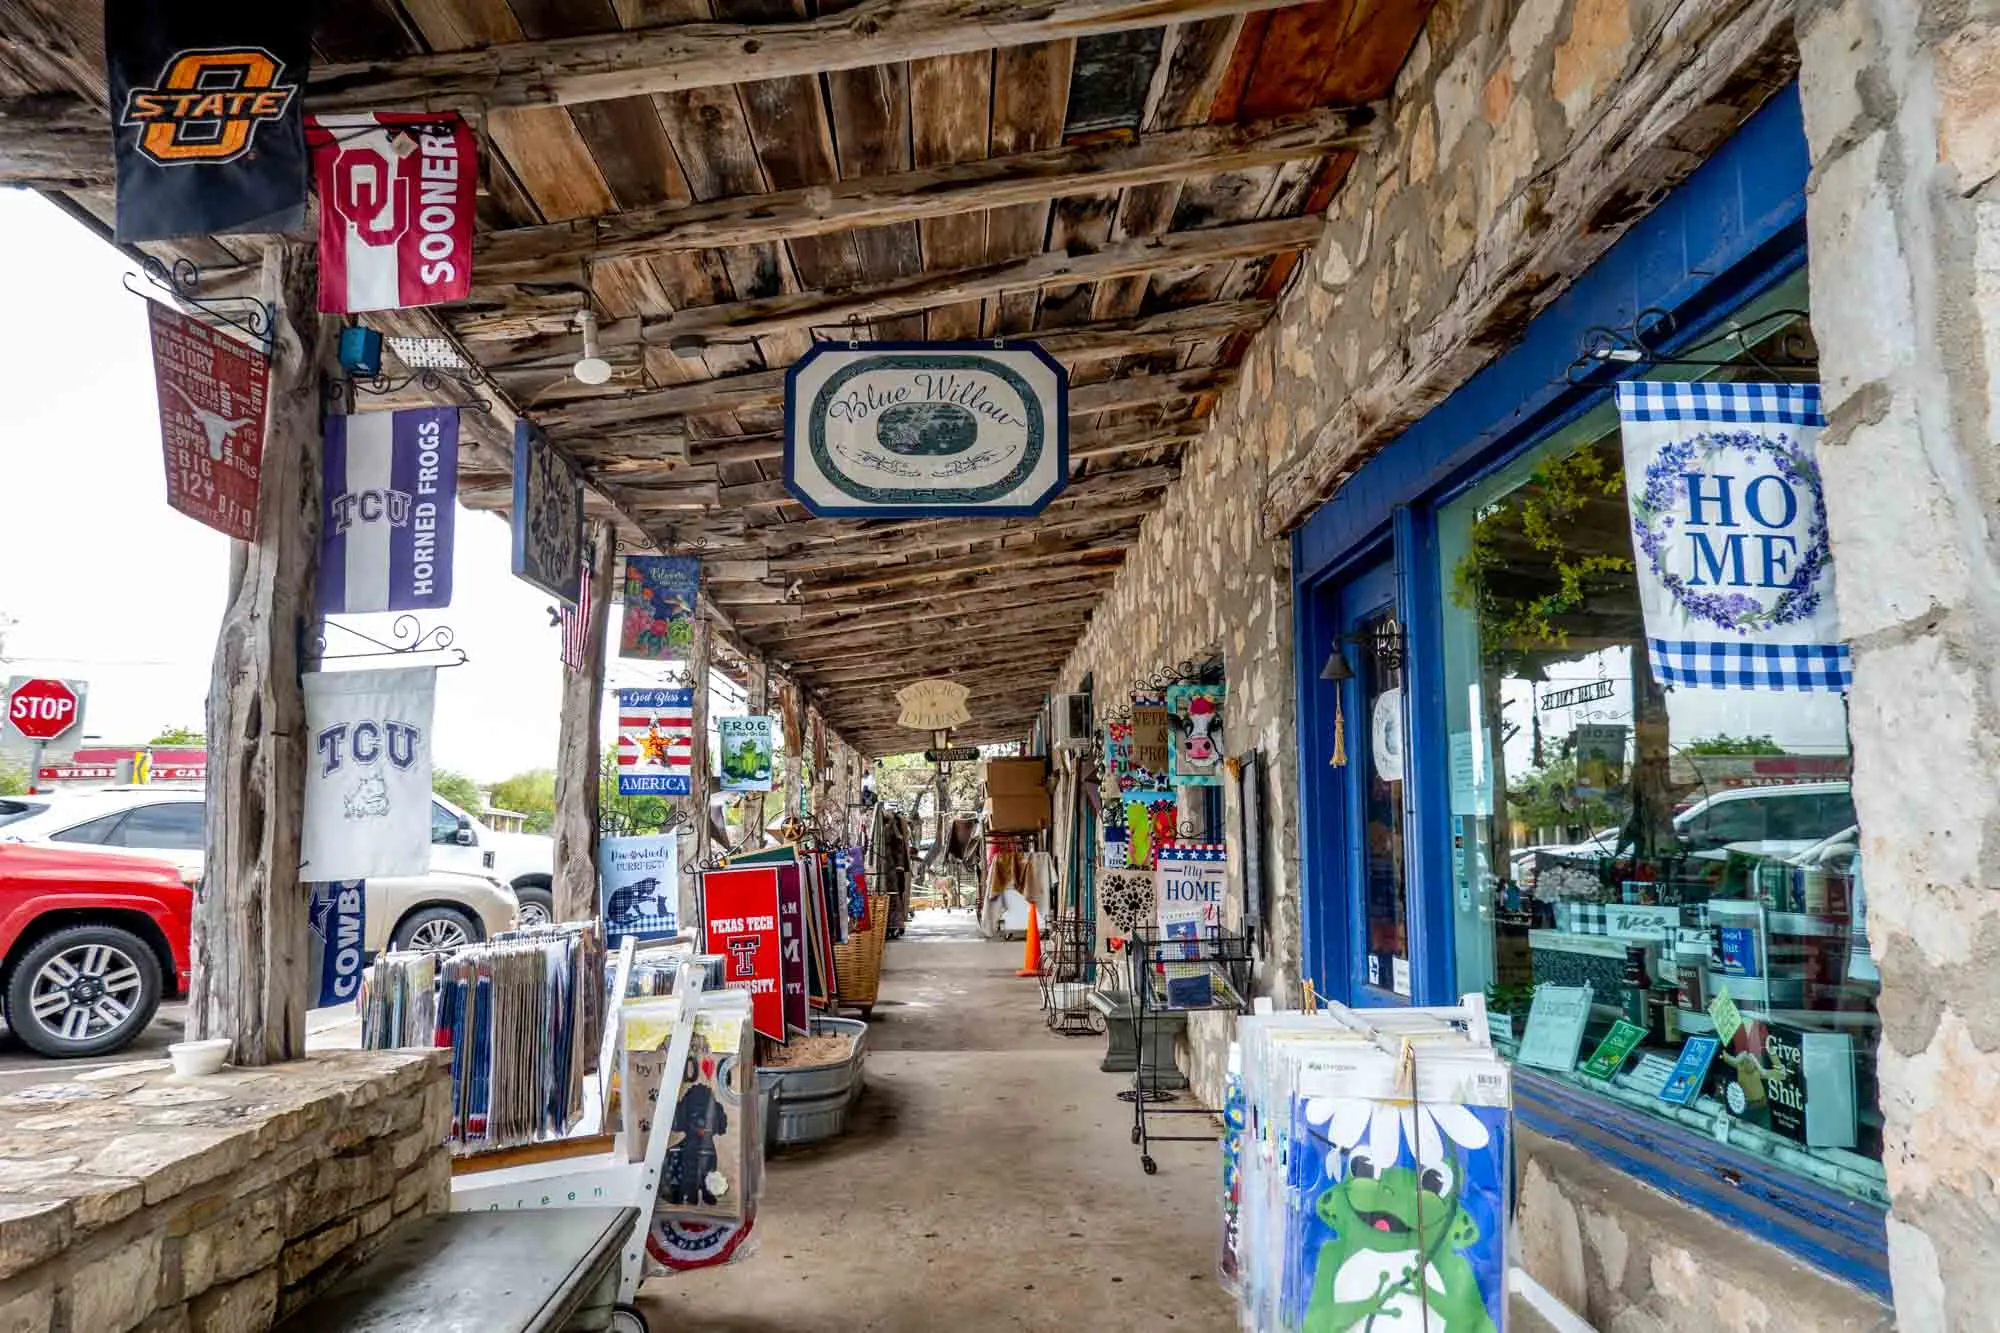 Storefront decorated with flags on Wimberley Square.